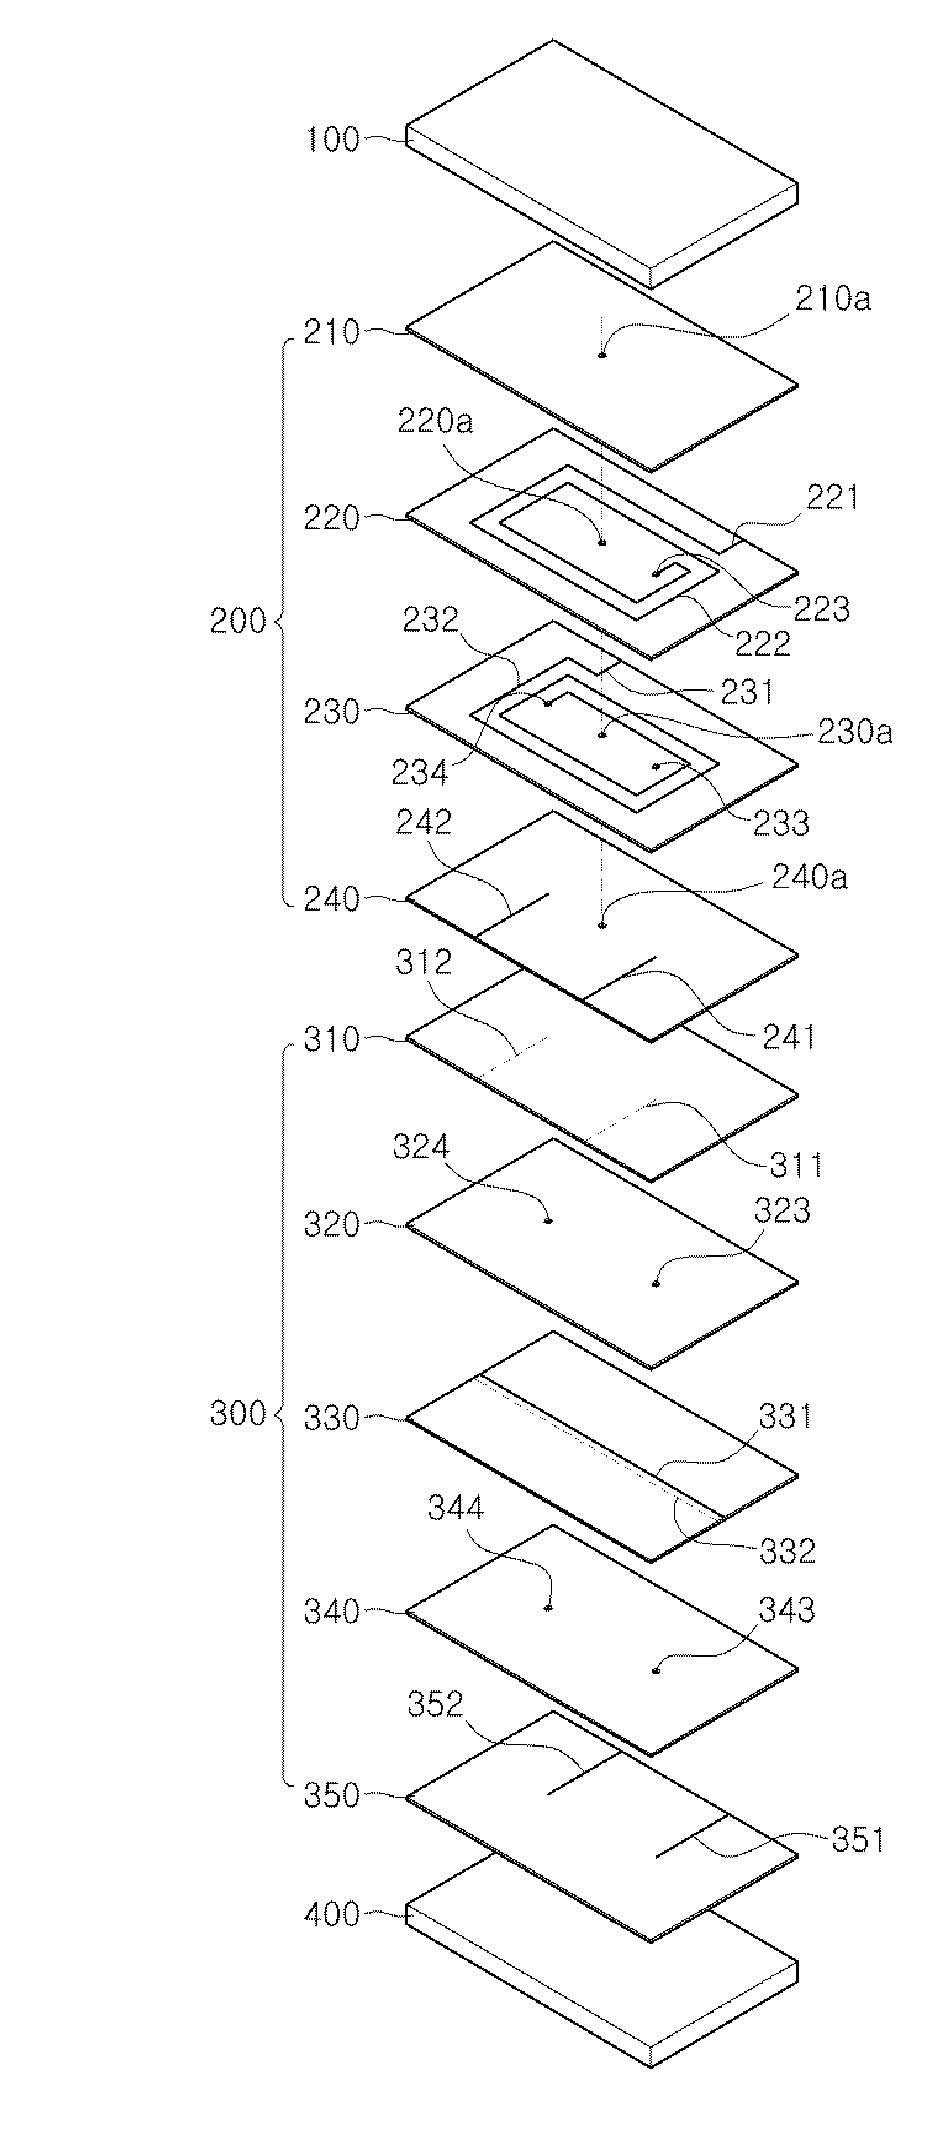 Circuit protection device and method of manufacturing the same